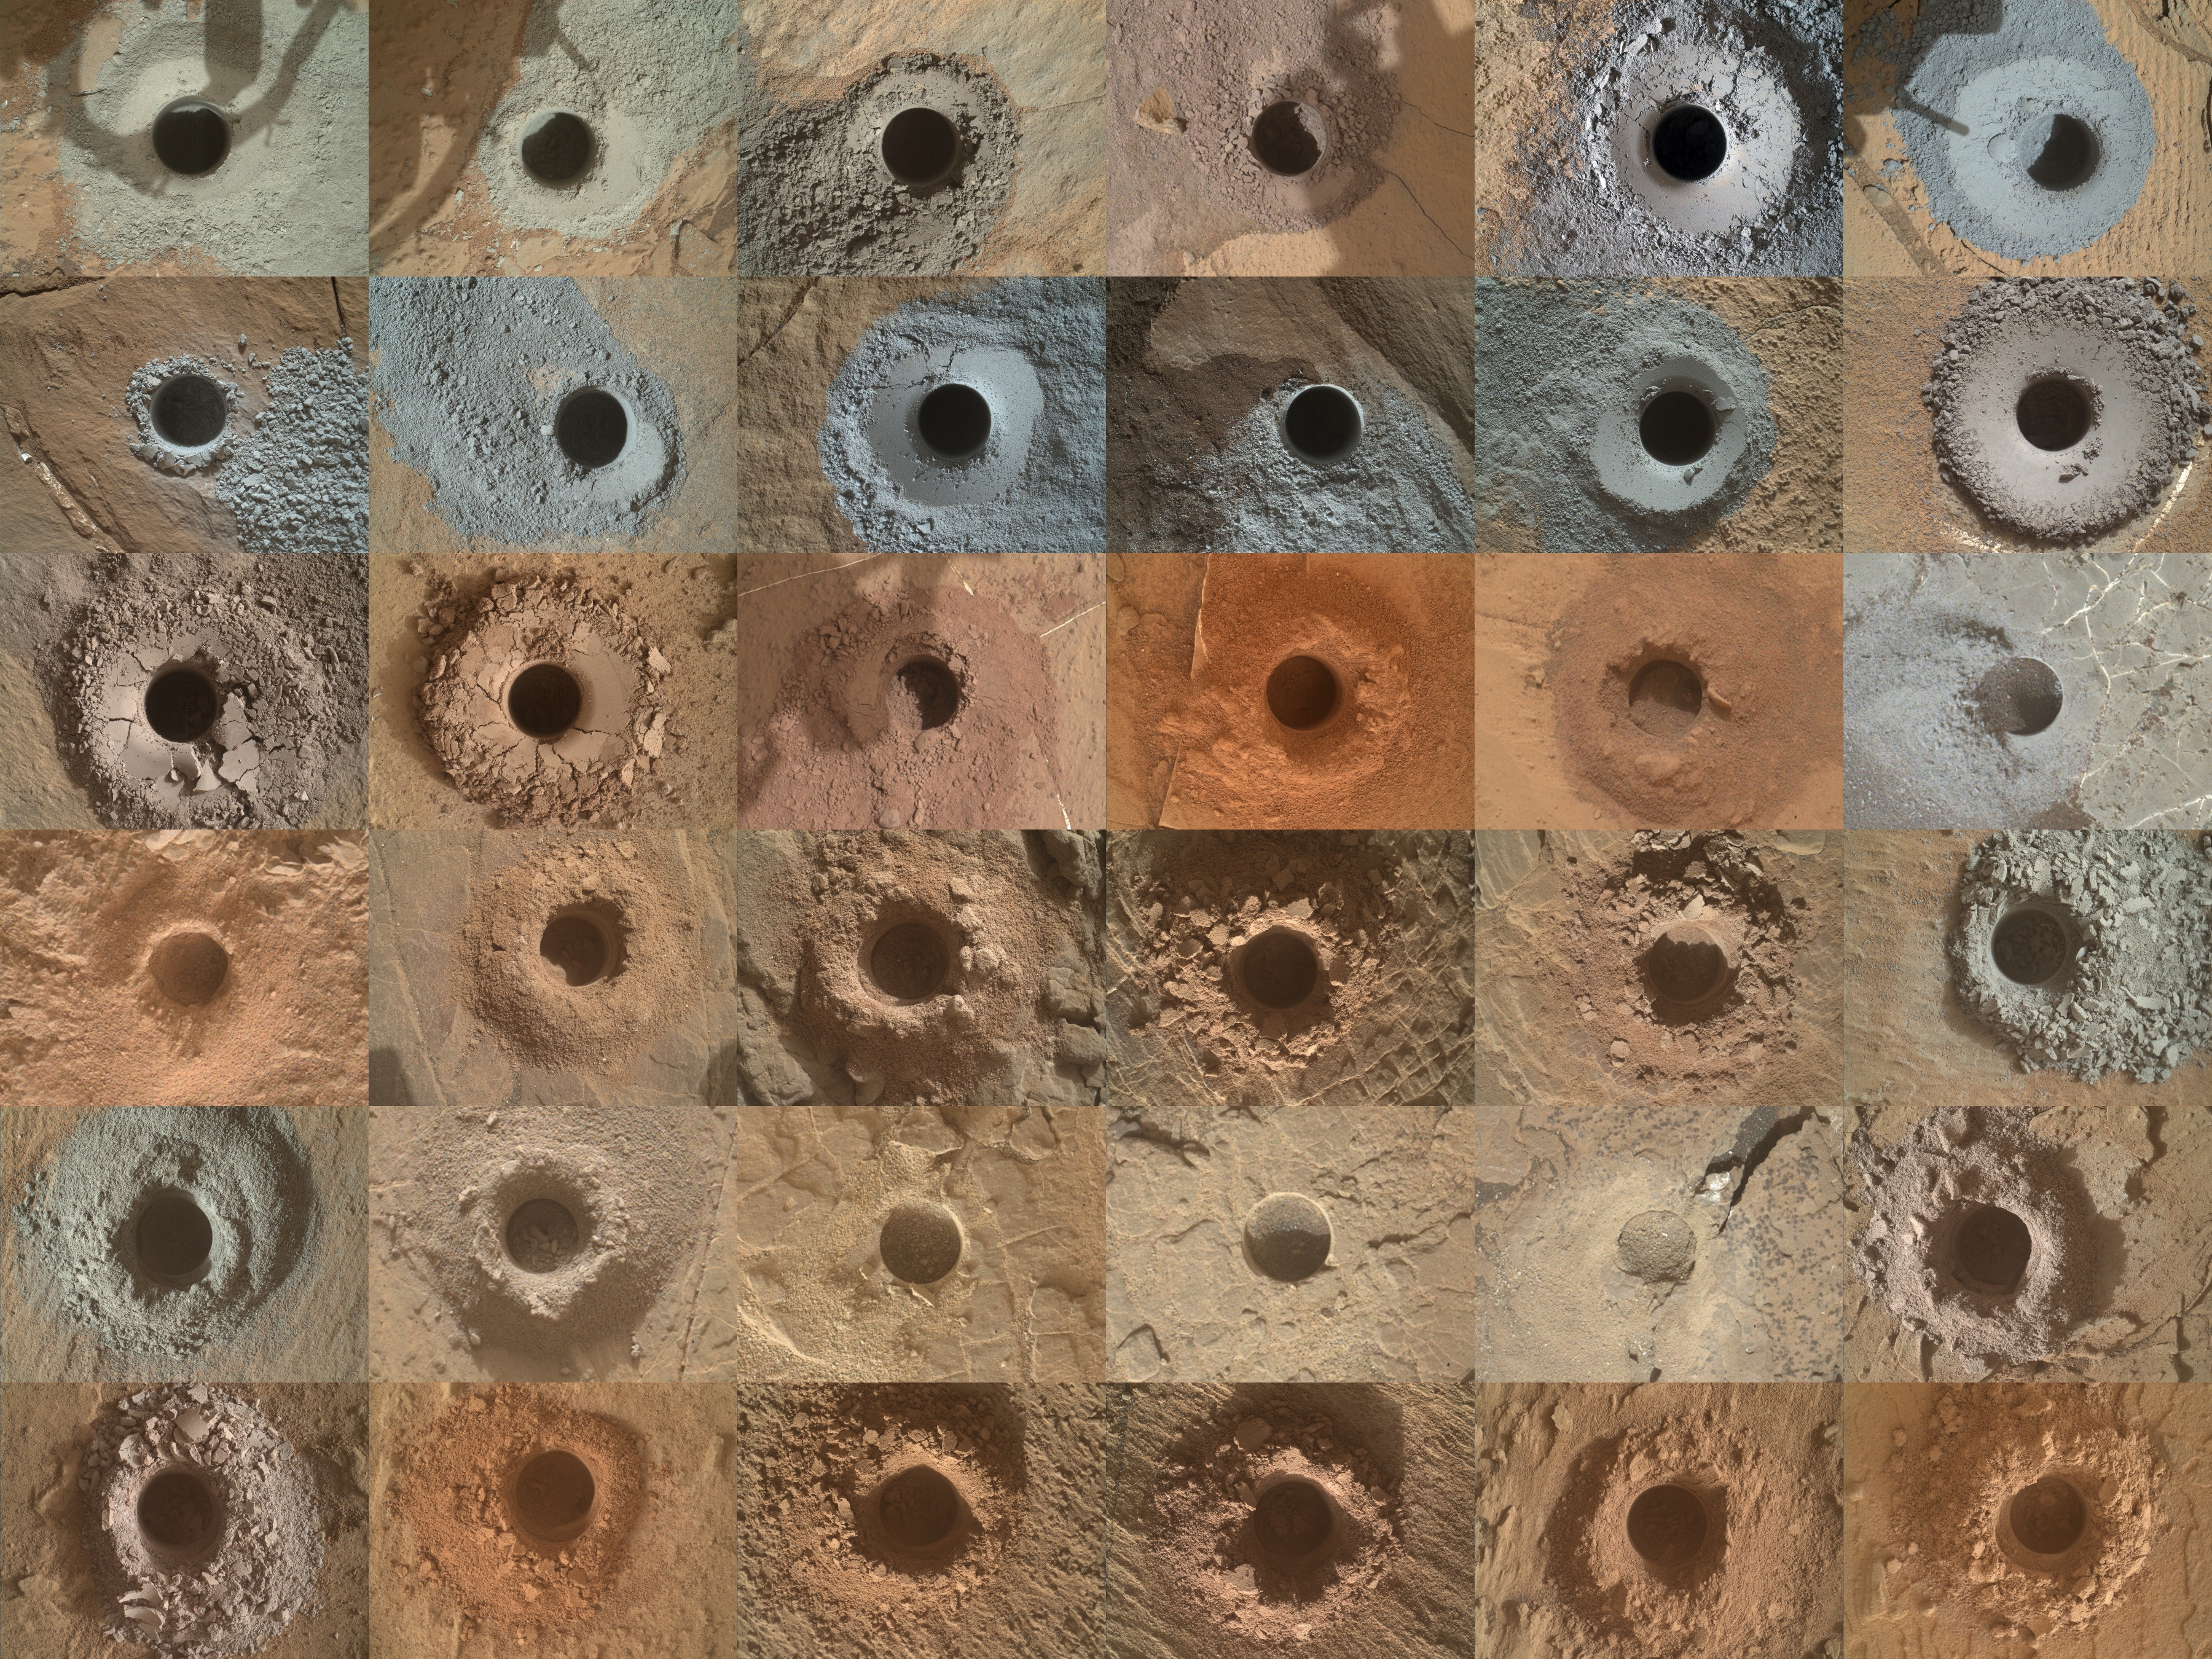 A montage of 36 drill holes in a variety of different soils.